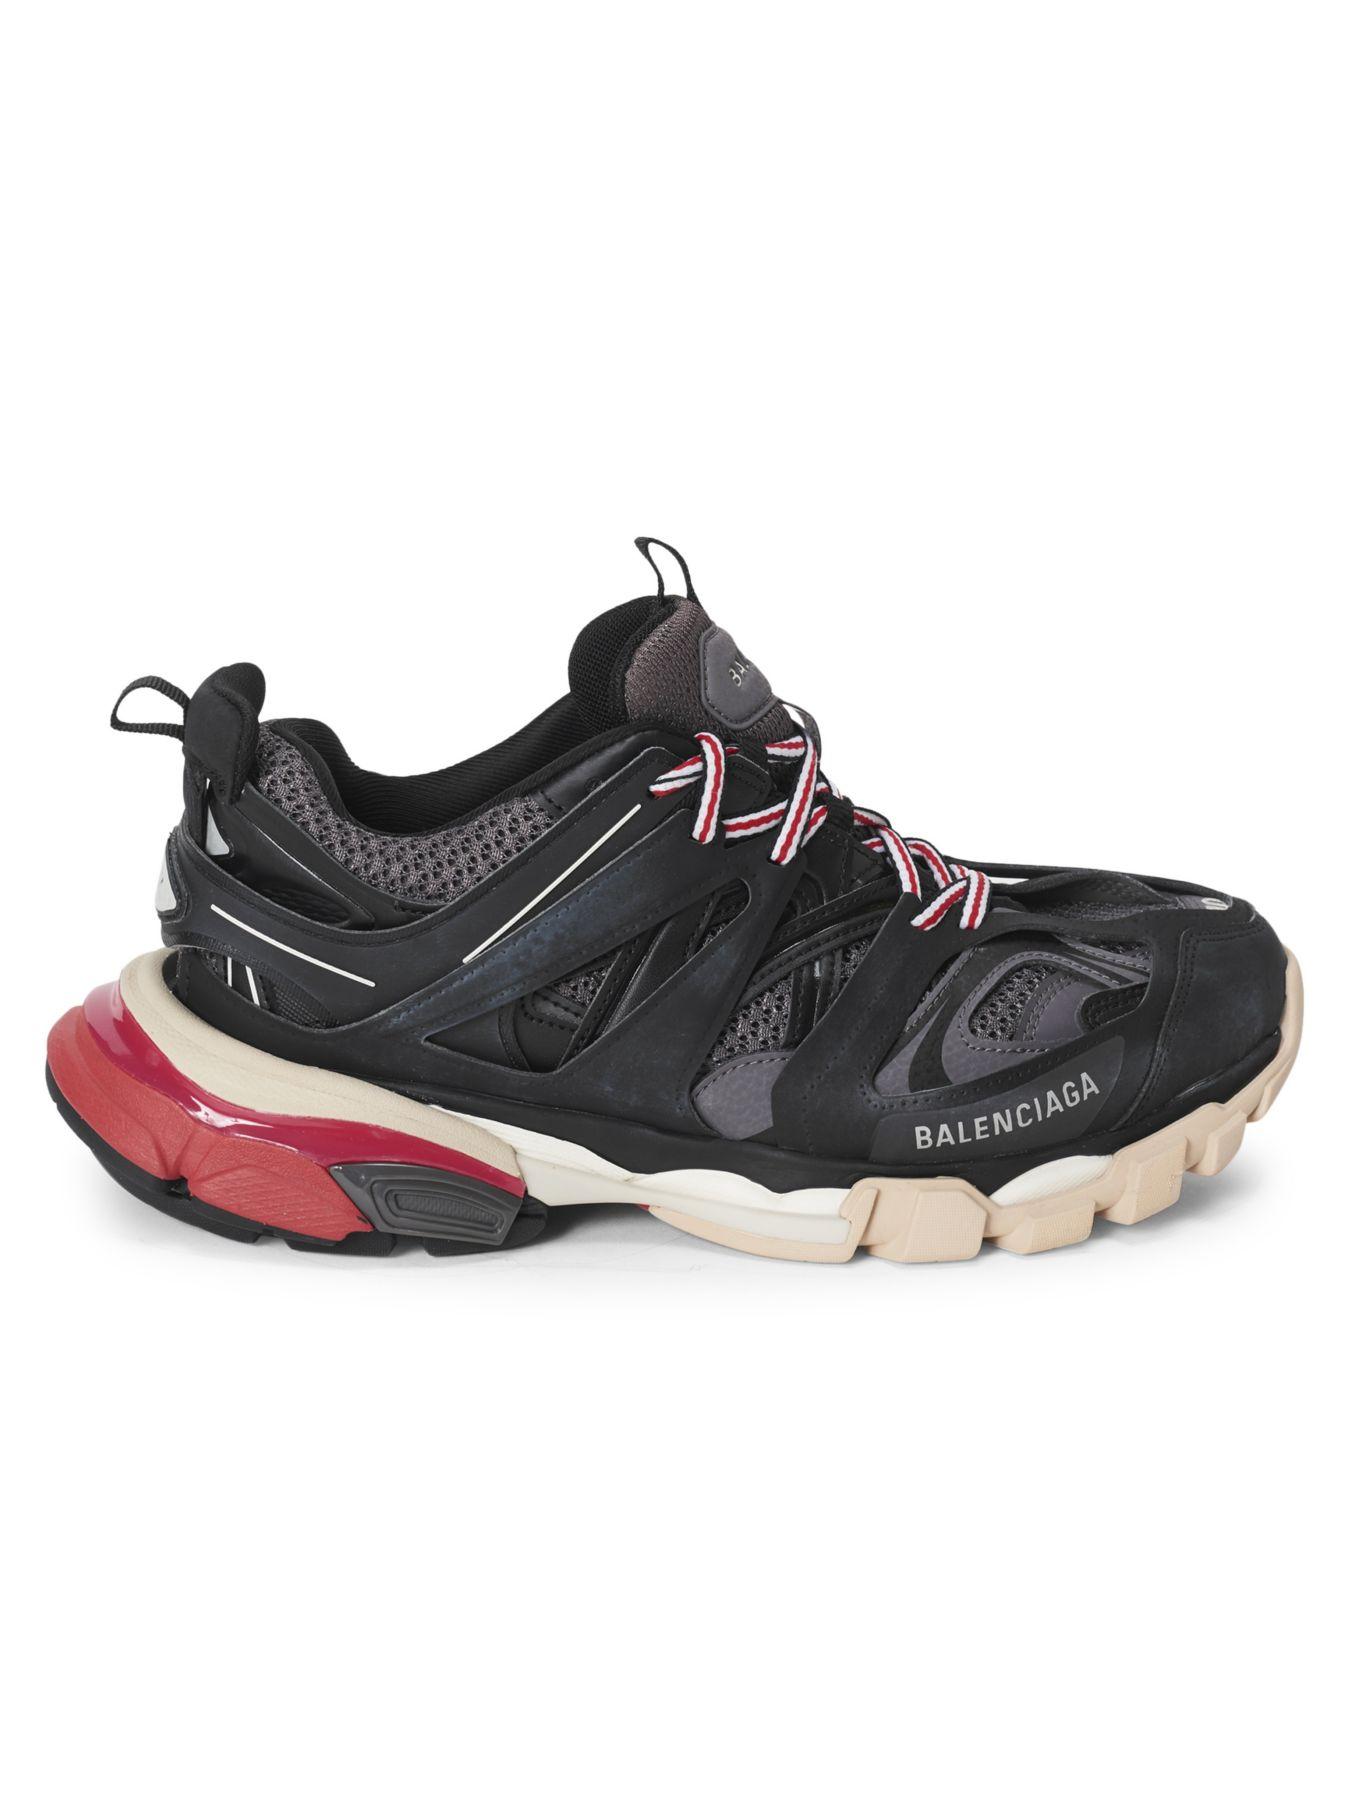 Balenciaga Synthetic Track Sneakers in Black - Lyst